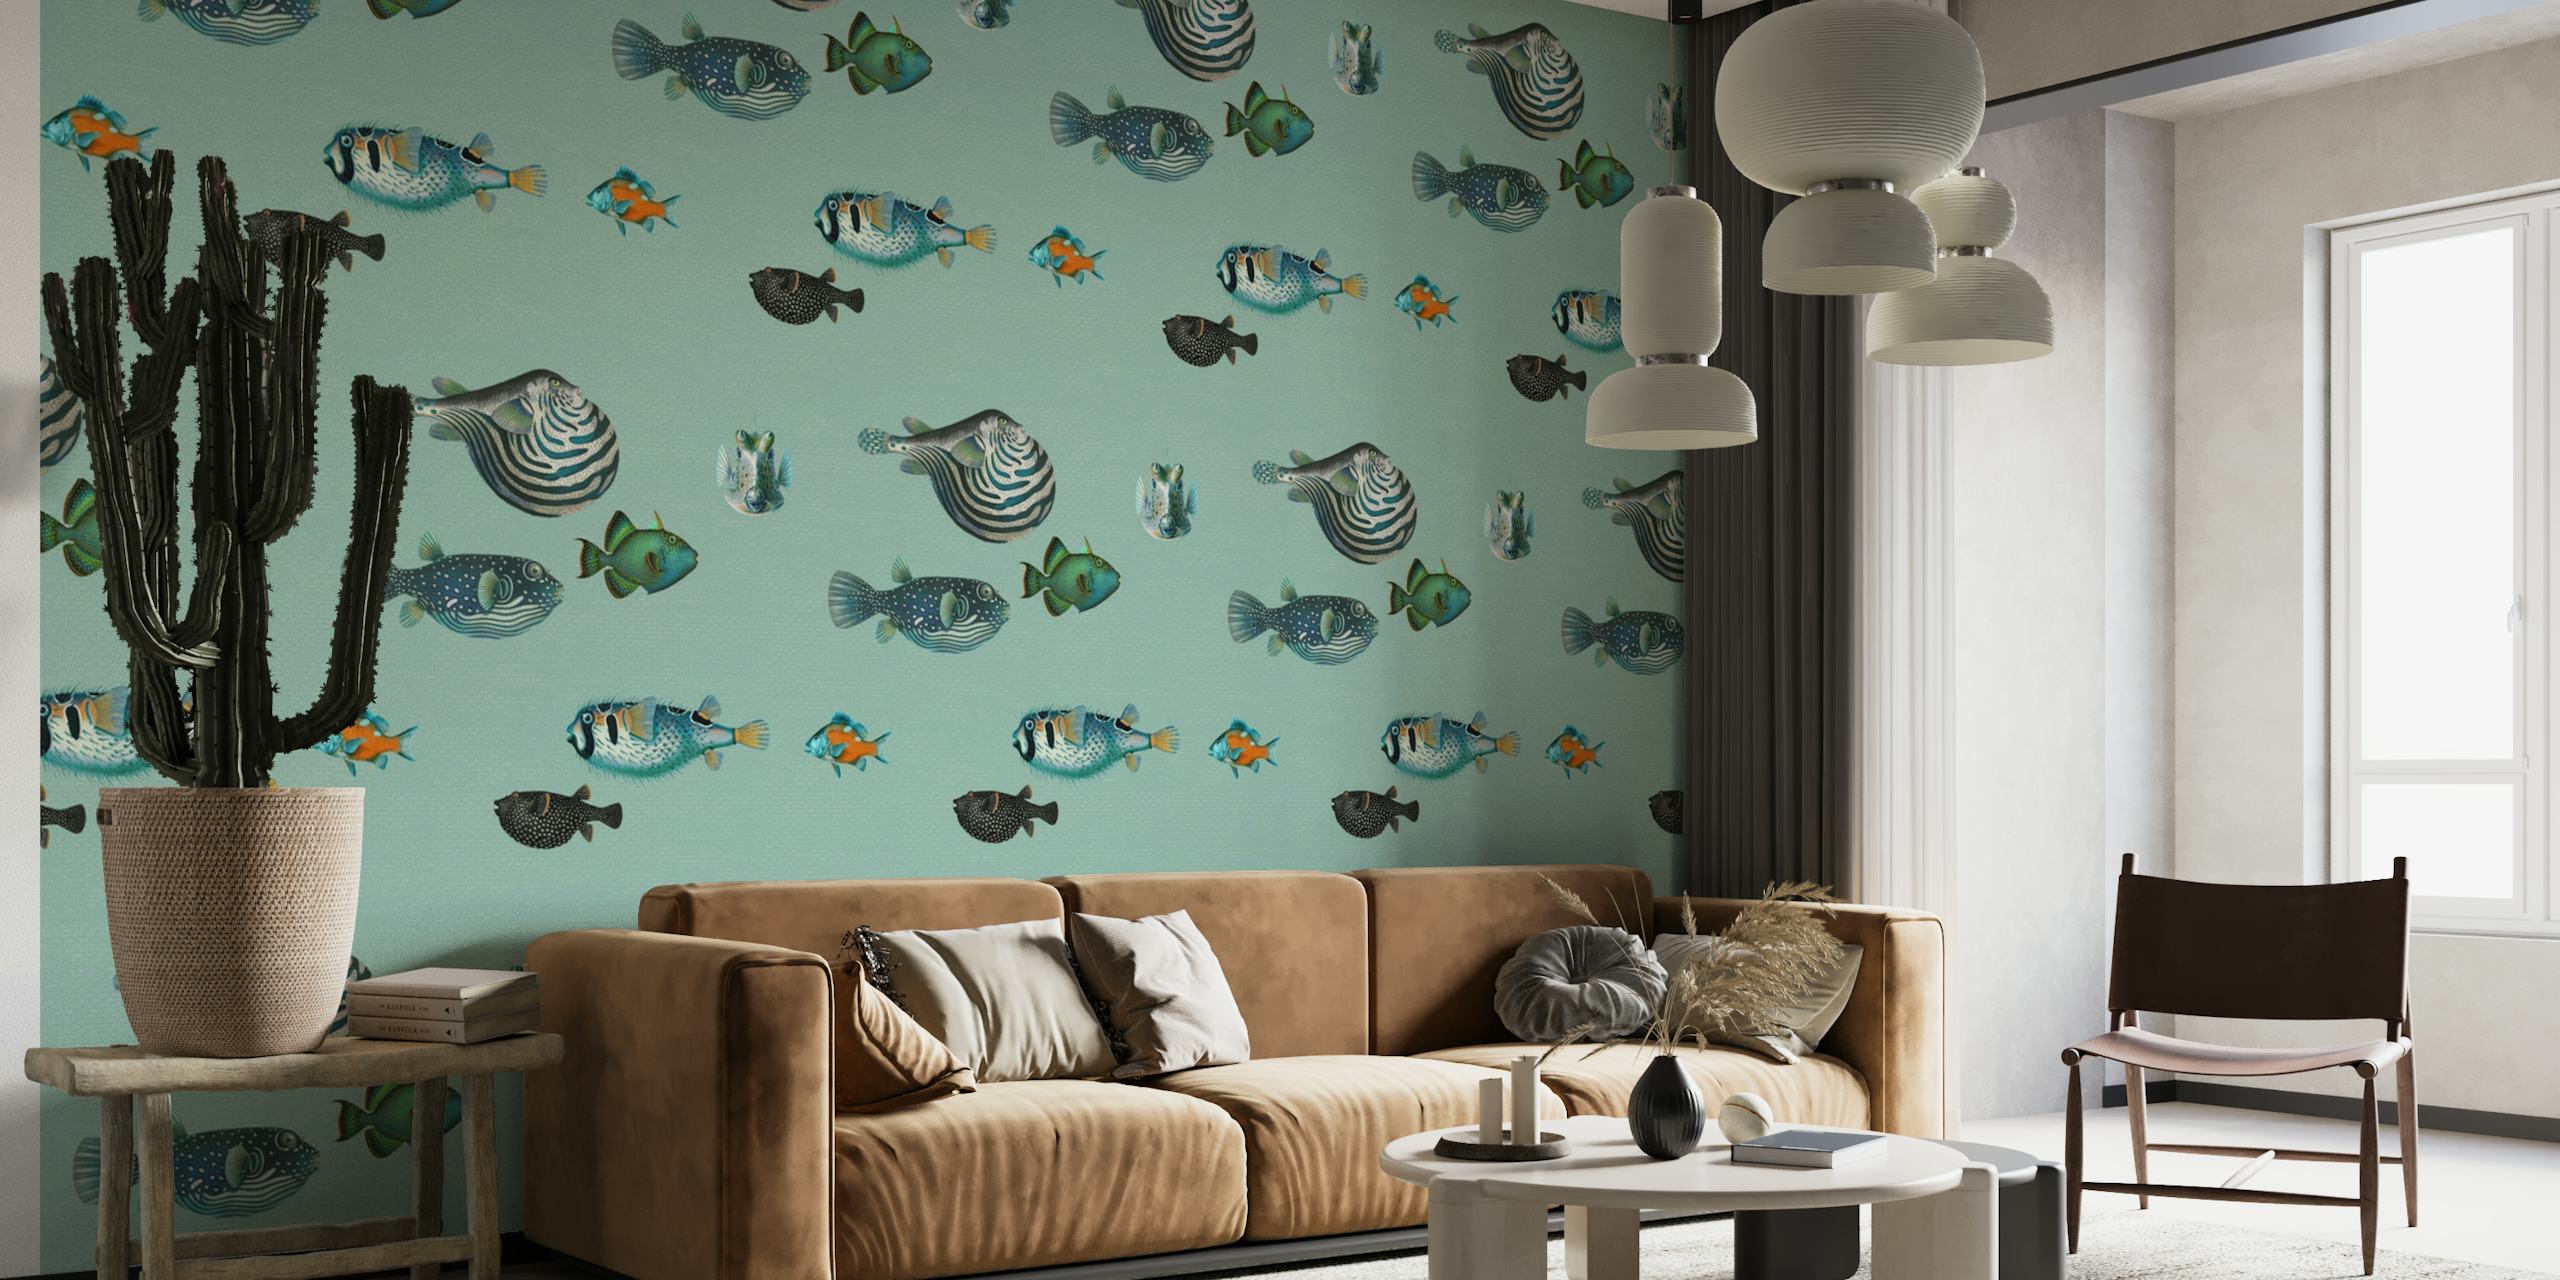 Illustrative fish pattern on duck egg blue background wall mural